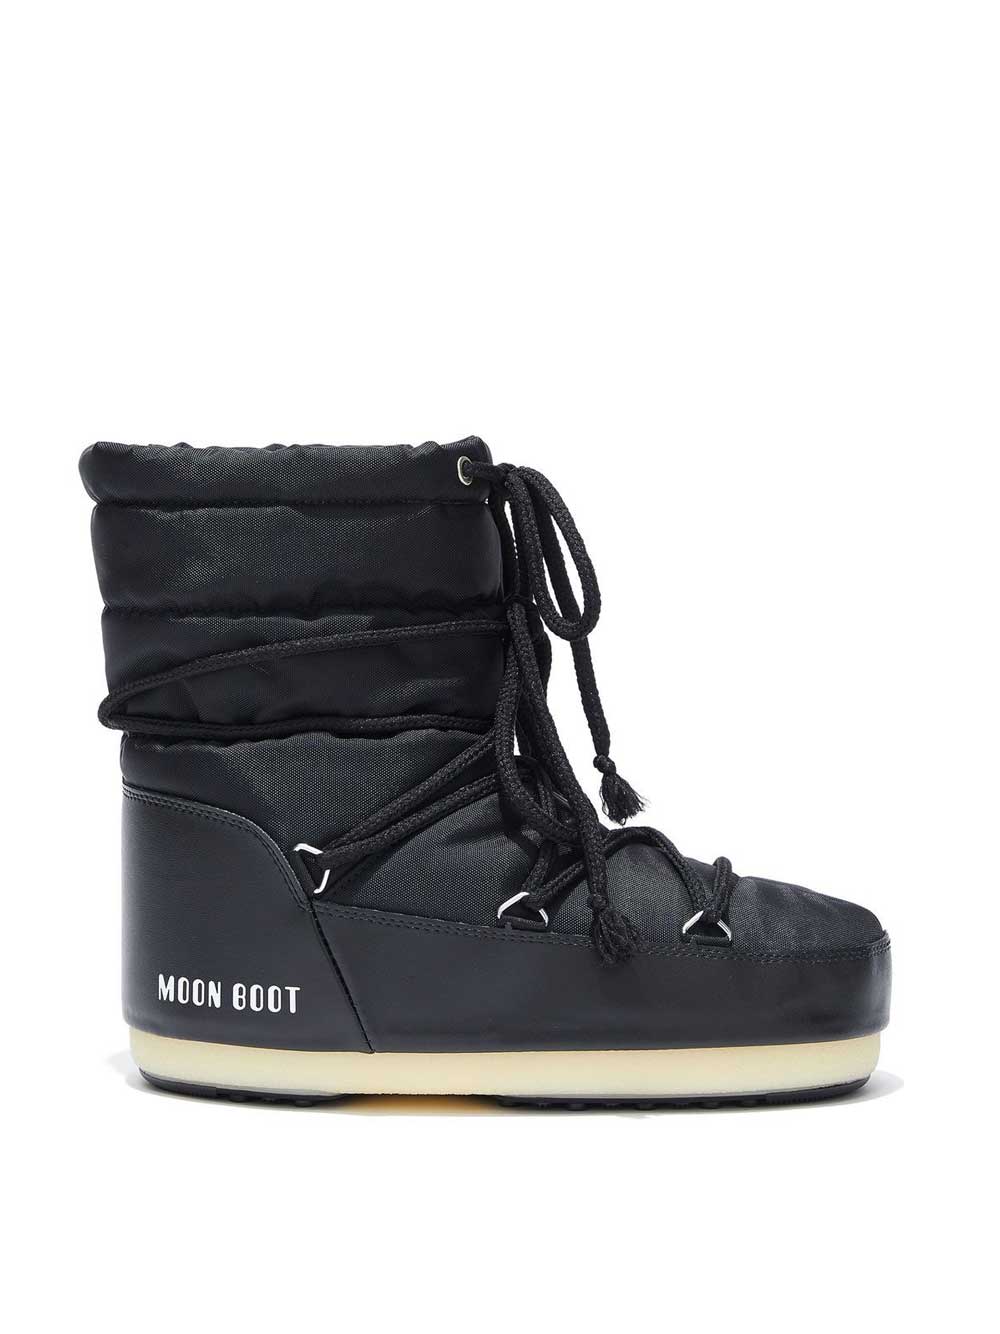 Black MB Low Boots